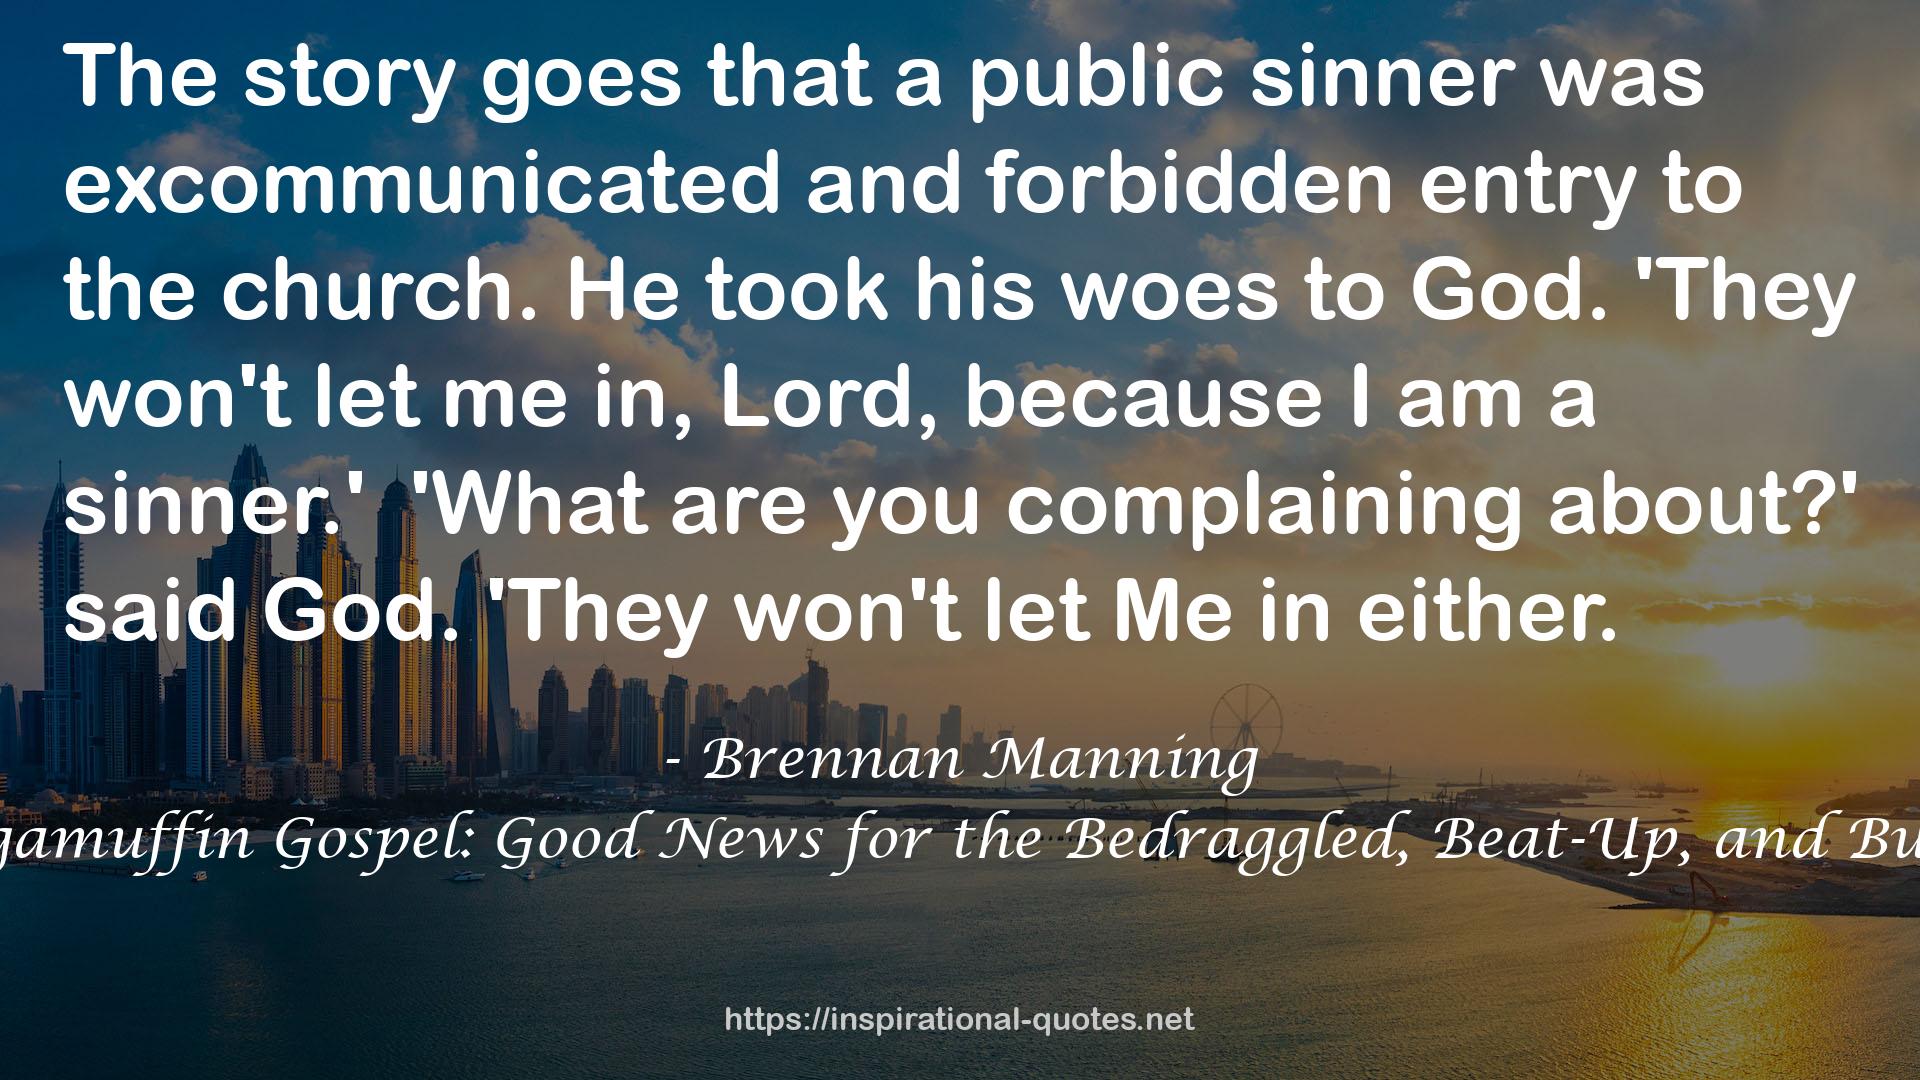 The Ragamuffin Gospel: Good News for the Bedraggled, Beat-Up, and Burnt Out QUOTES